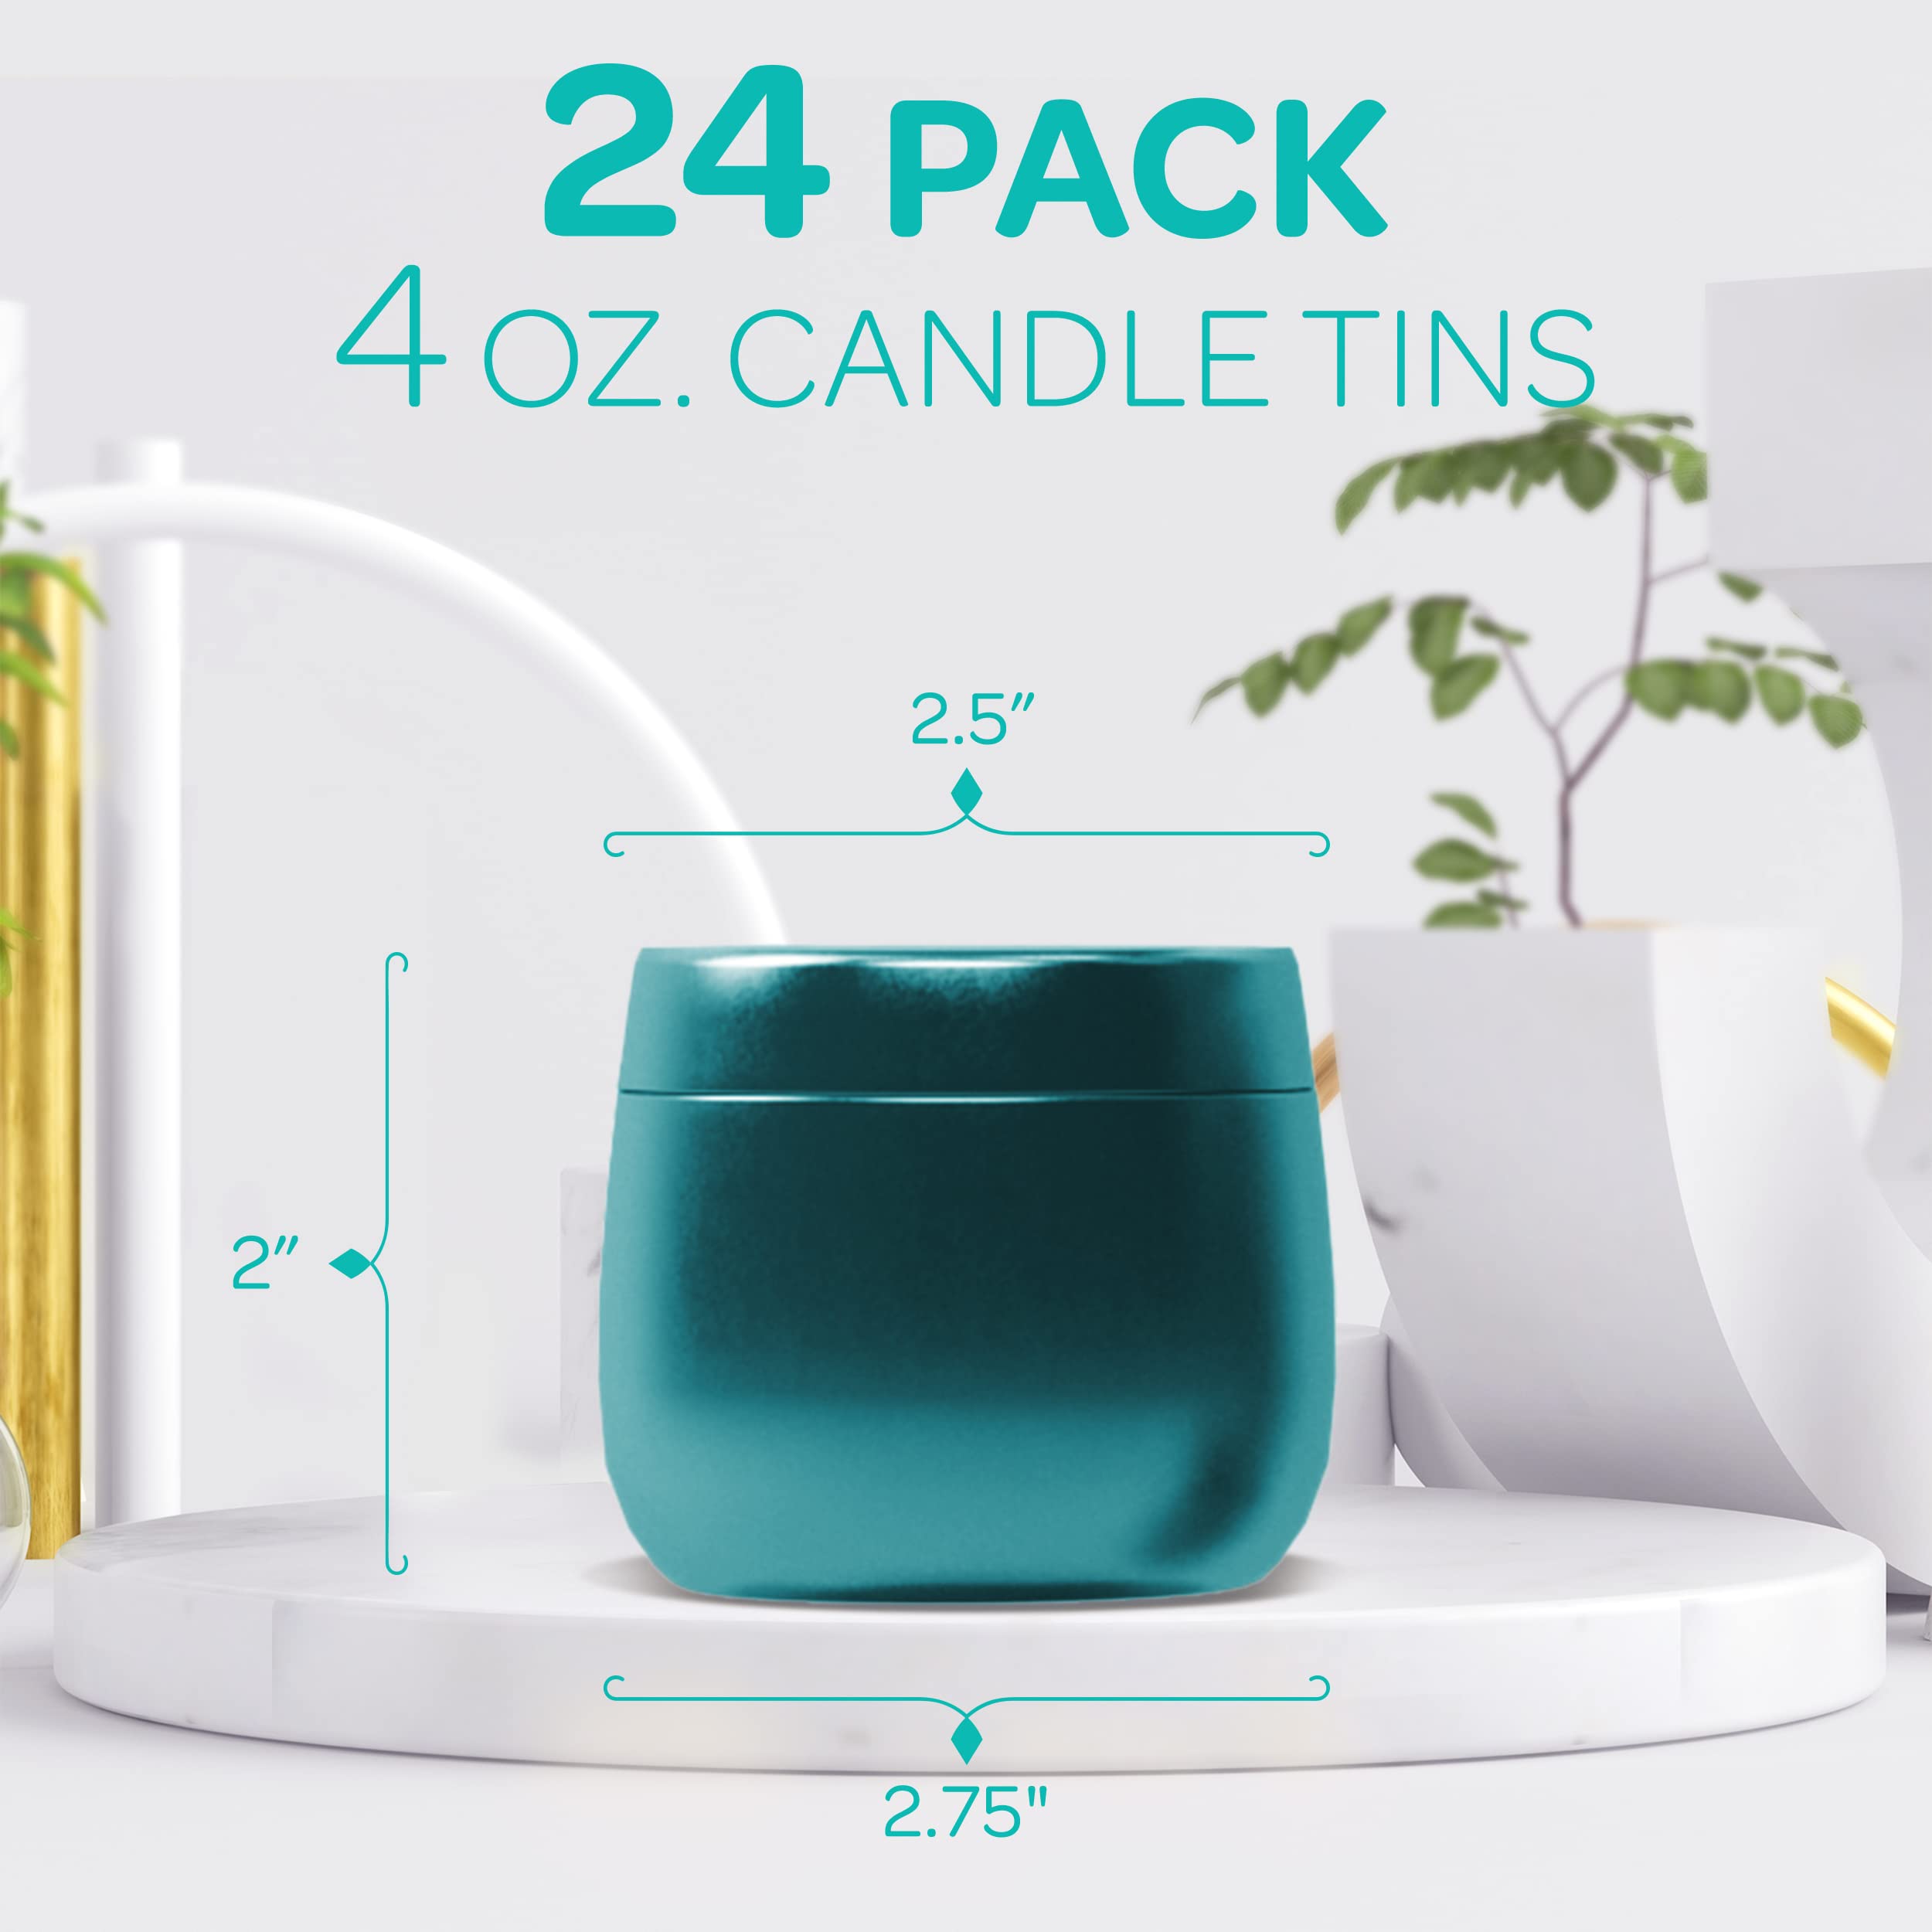 Hearts & Crafts Teal Candle Tins 4 oz with Lids - 24-Pack of Bulk Candle Jars for Making Candles, Arts & Crafts, Storage, Gifts, and More - Empty Candle Jars with Lids  - Like New